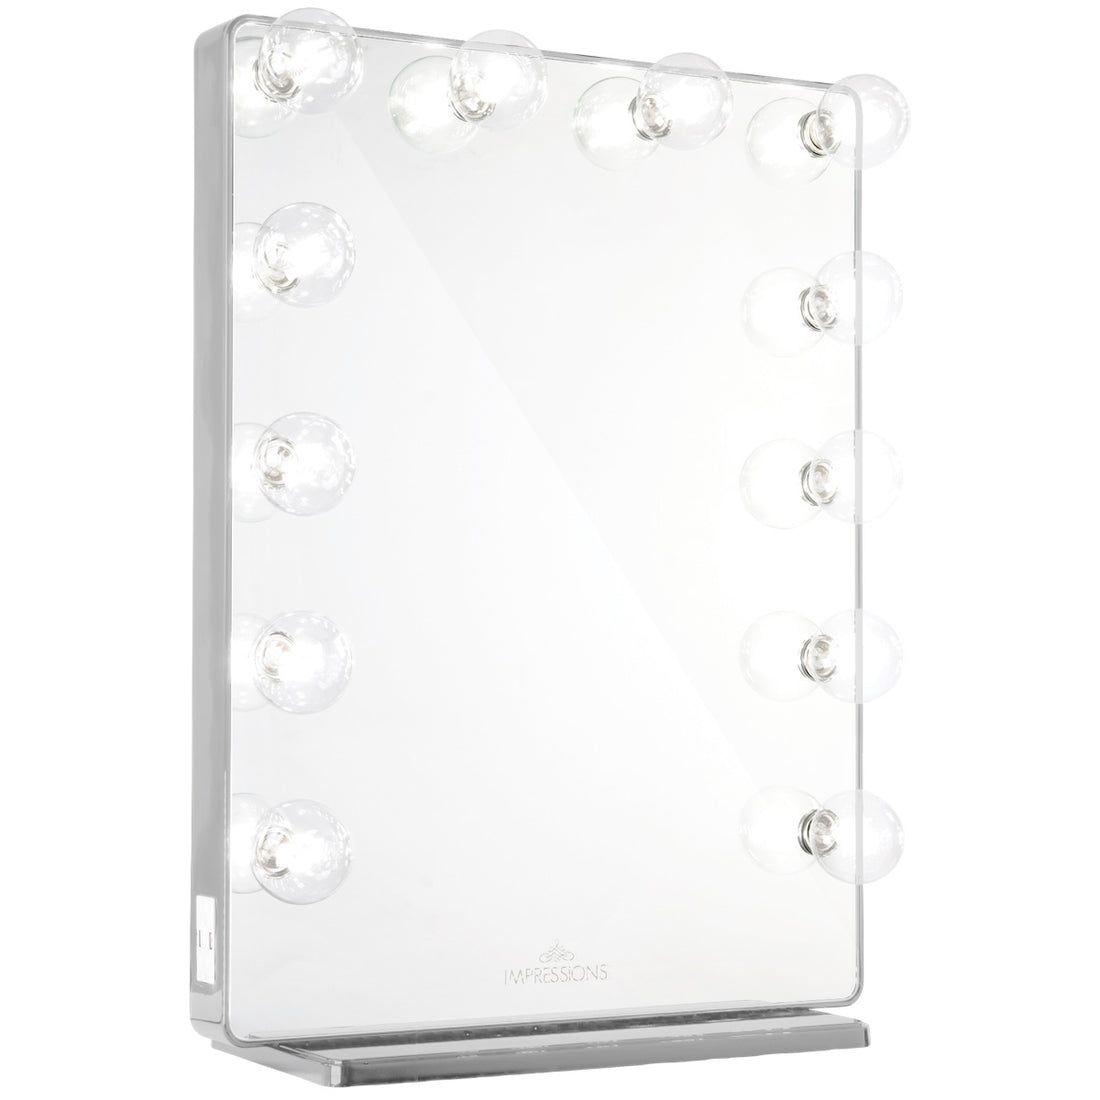 Impressions Hollywood Glow XL 2.0 Vanity Mirror in Silver with Clear LED